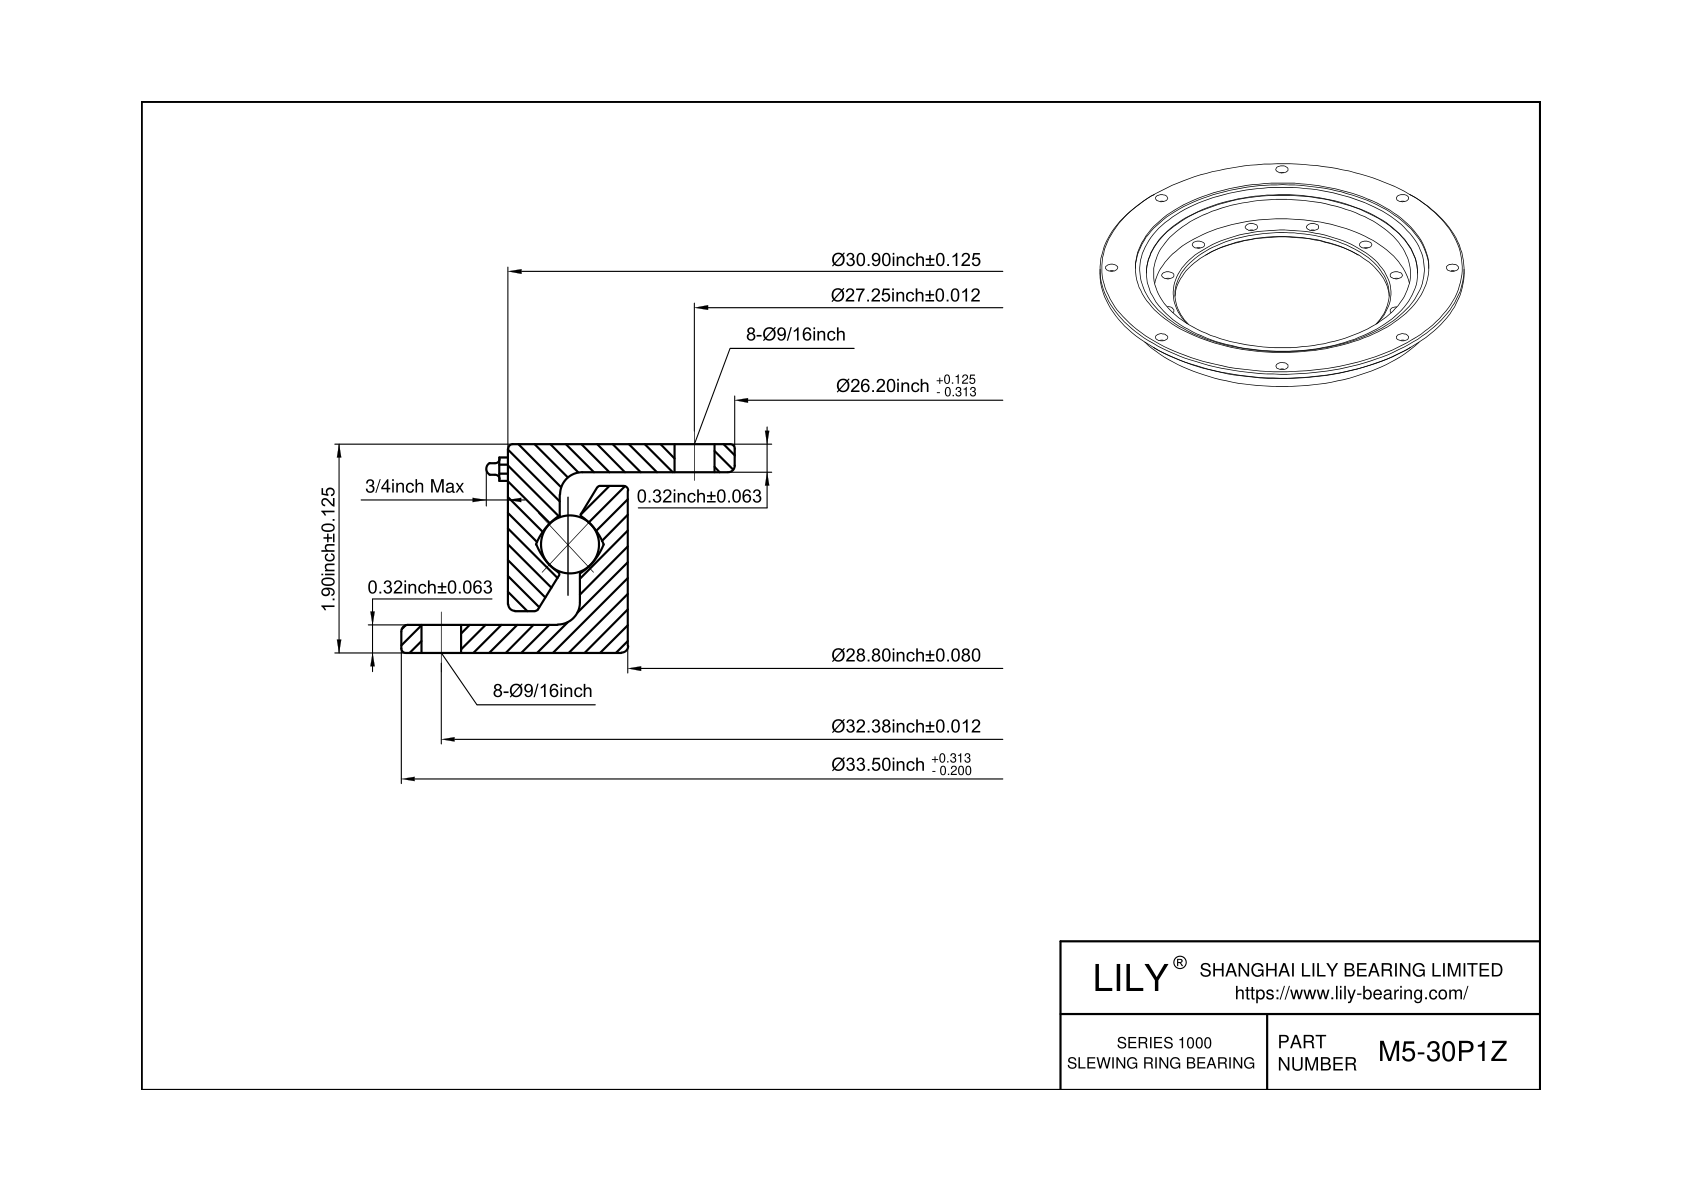 M5-30P1Z Developed For Use In Transport Vehicles cad drawing